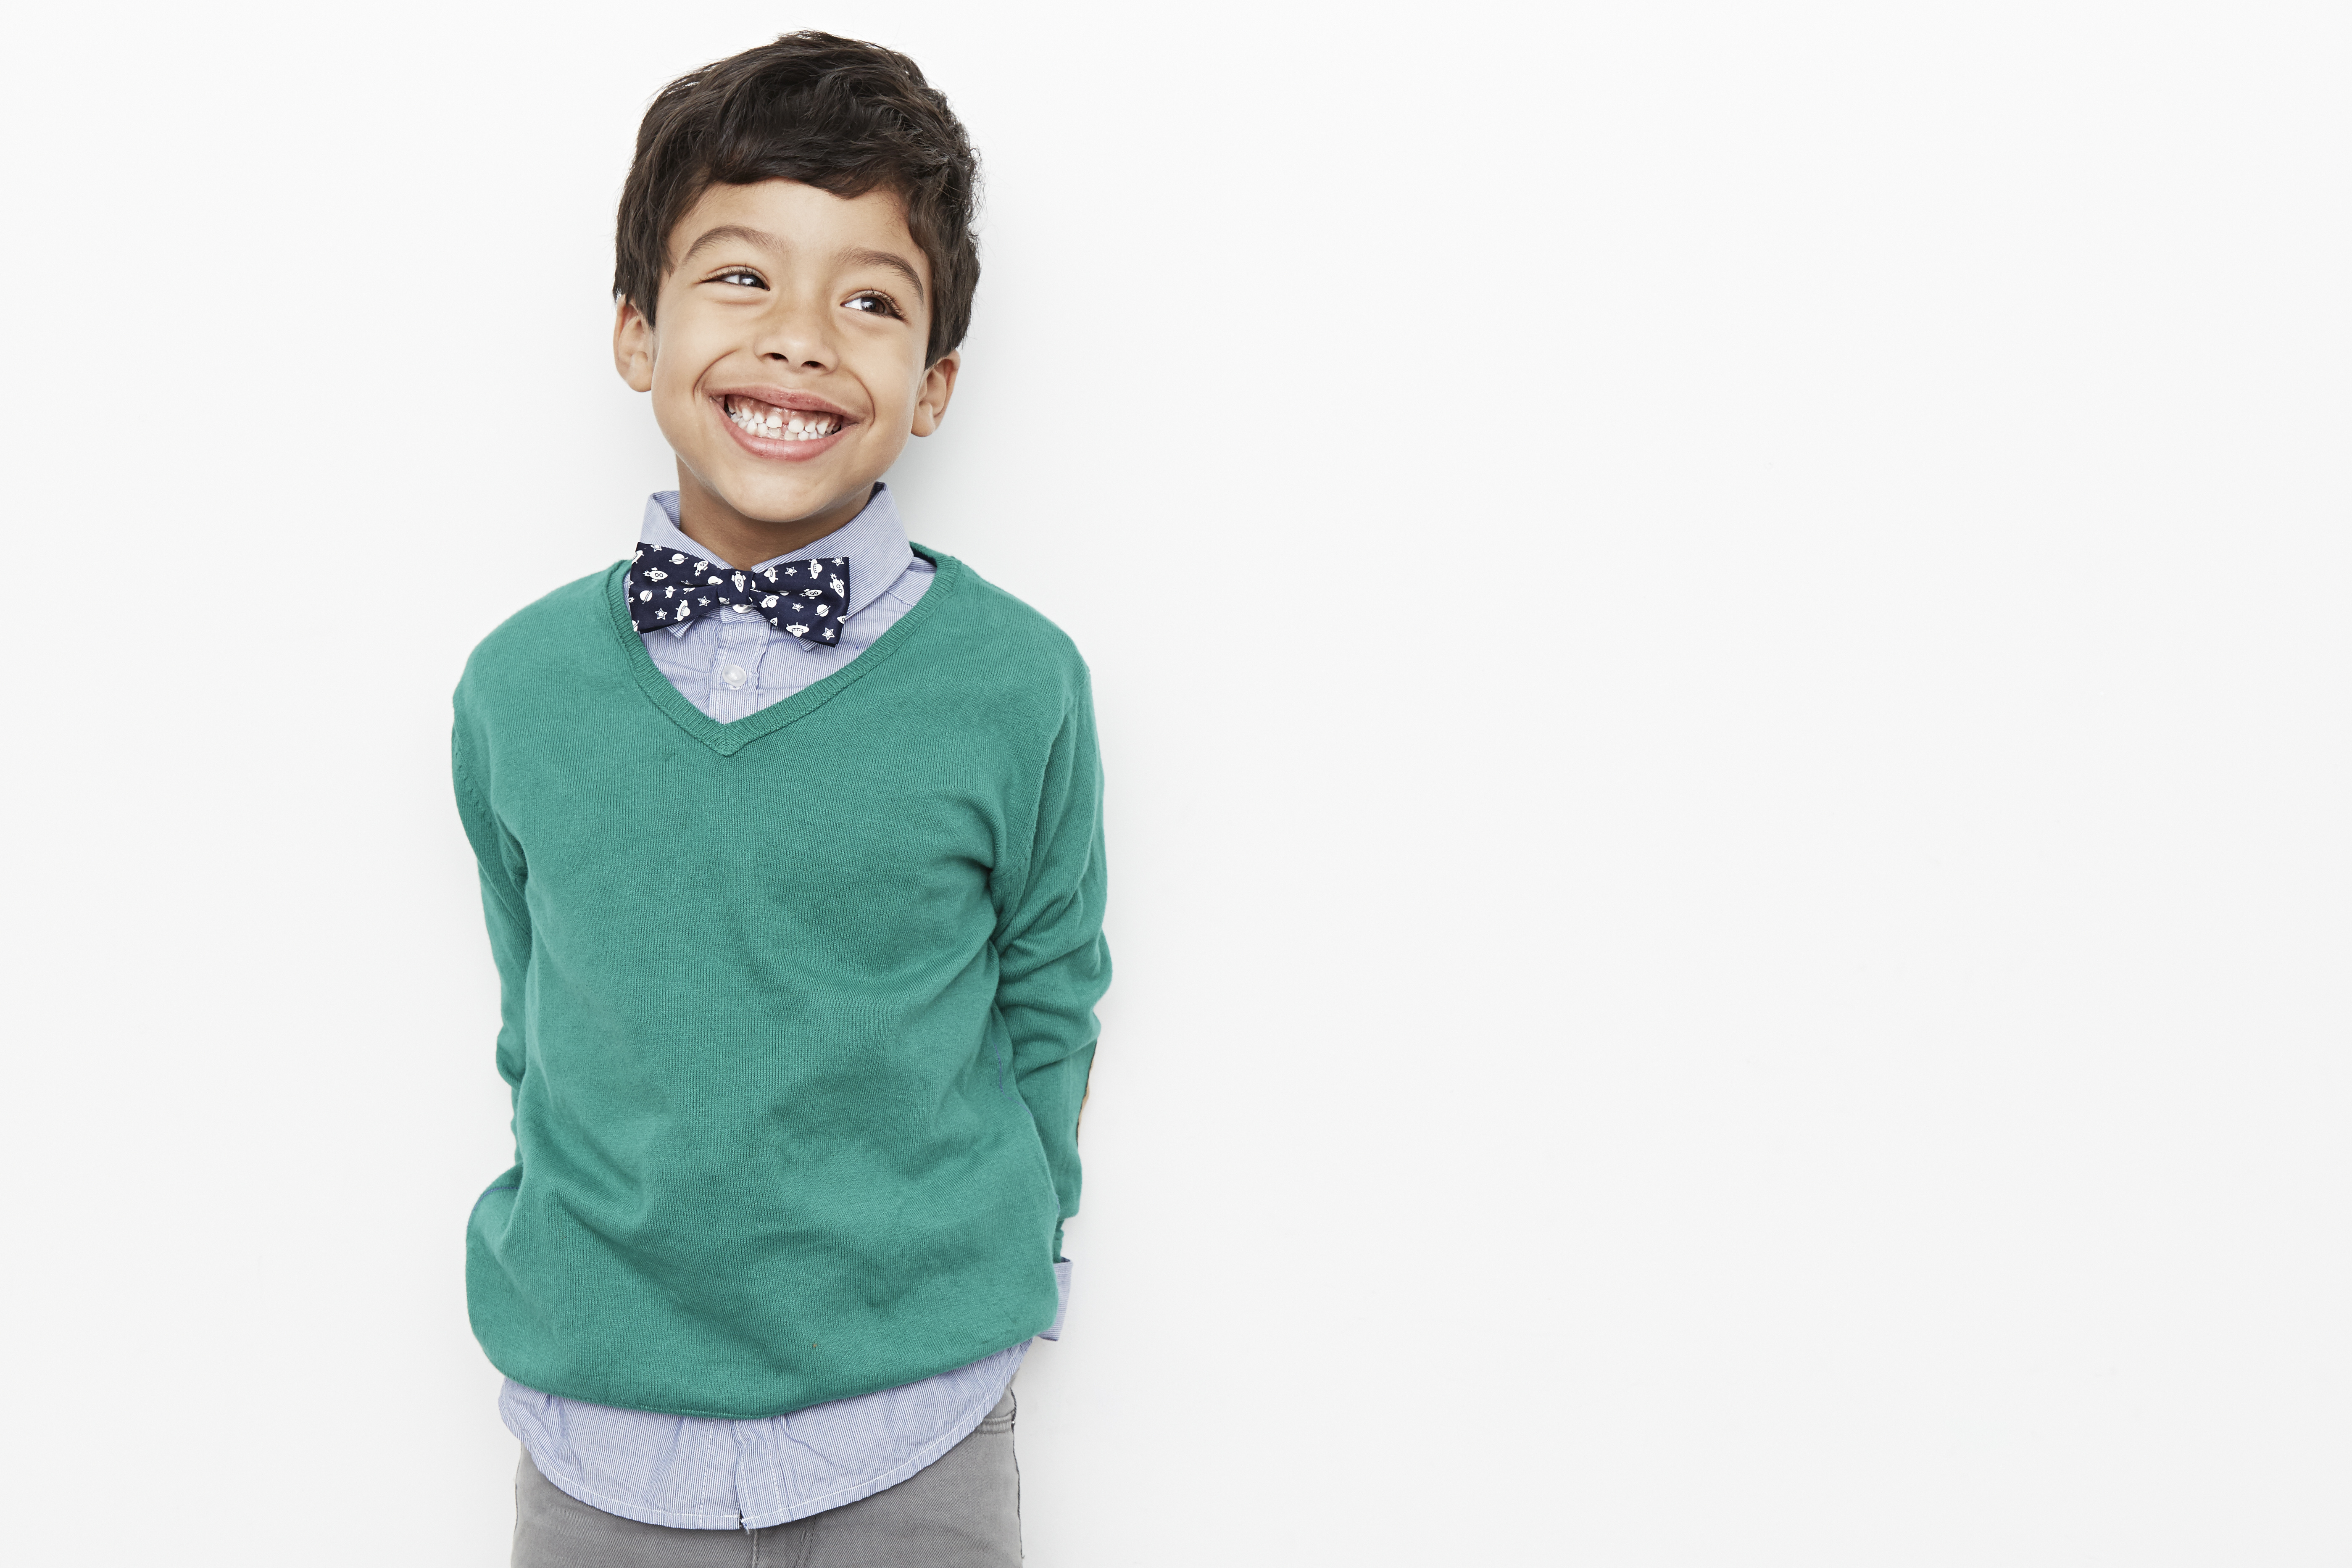 Boy looking preppy with bow tie | Source: Getty Images